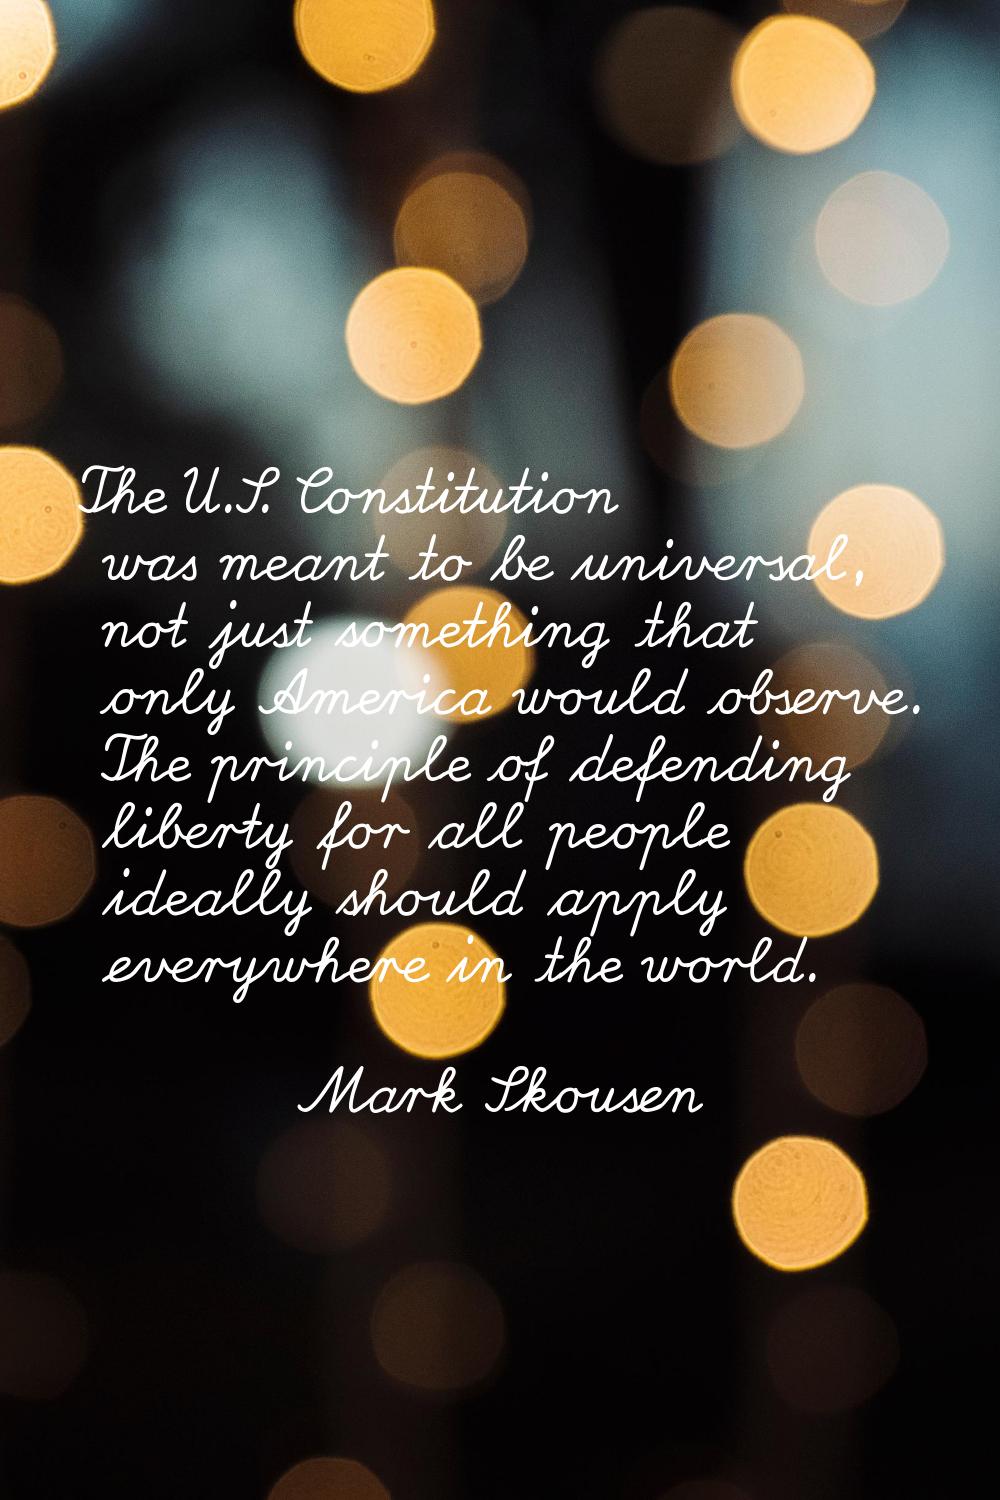 The U.S. Constitution was meant to be universal, not just something that only America would observe